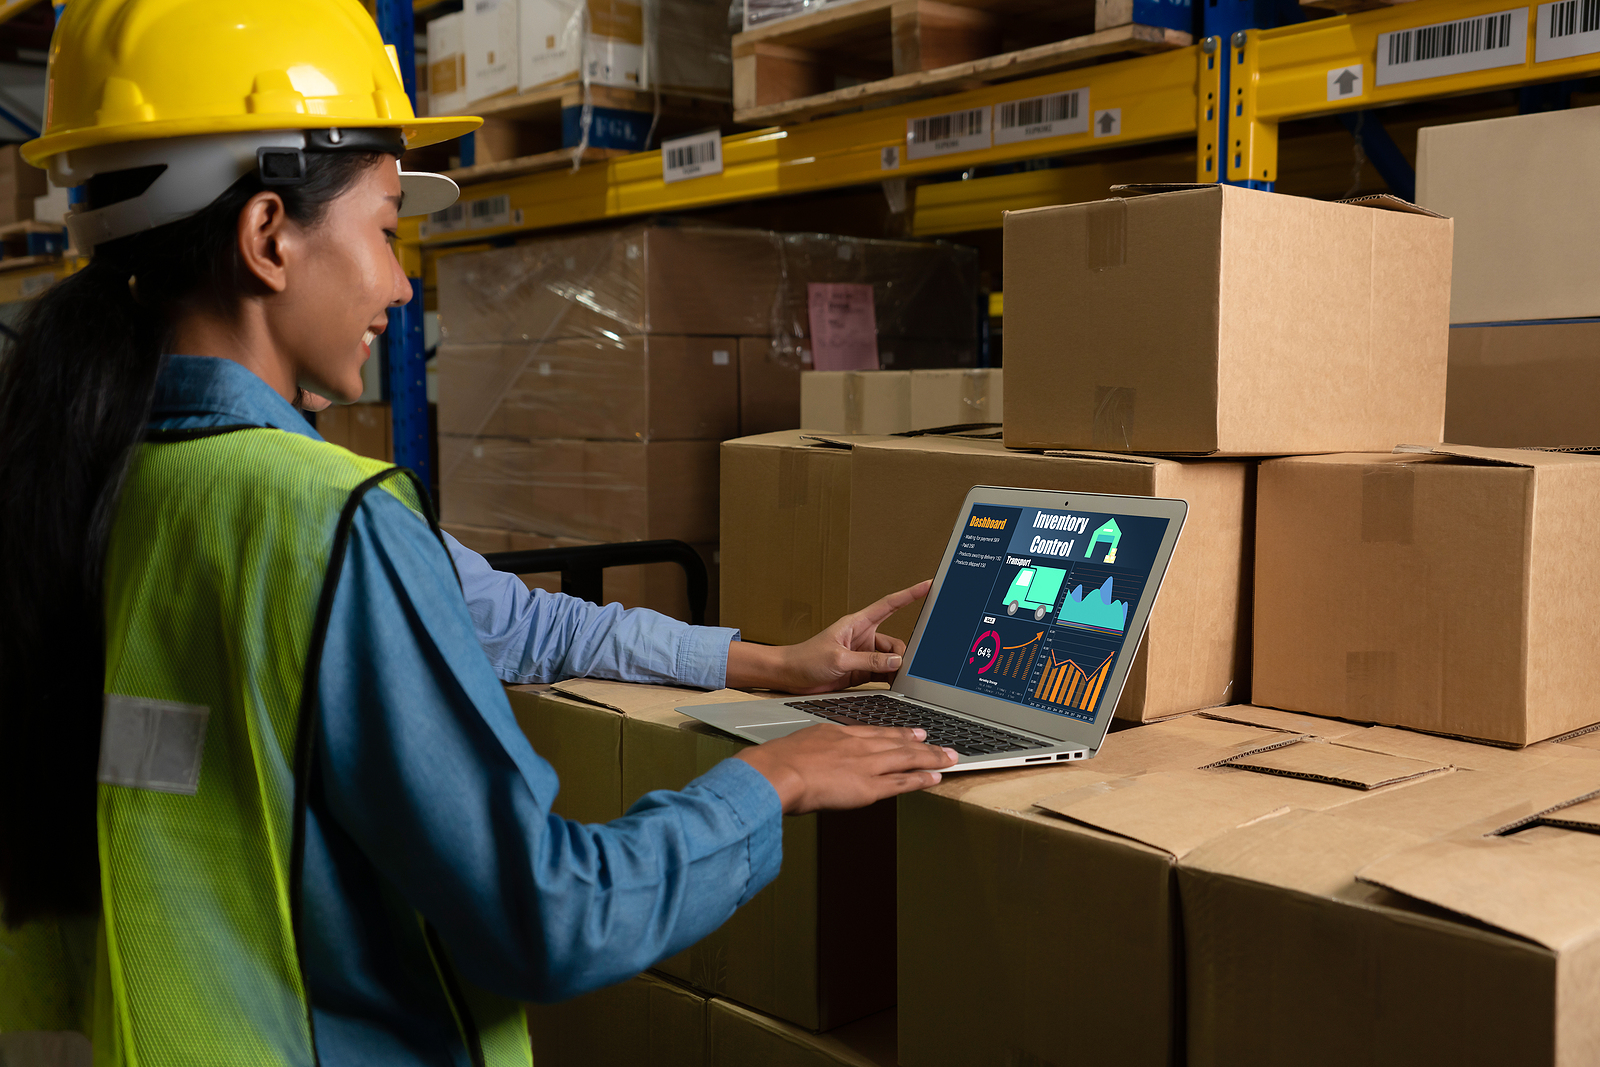 Shipping with NetSuite used to be a tedious and frustrating process. Now there’s a faster, better way. Here are six features you need now and how to get them.